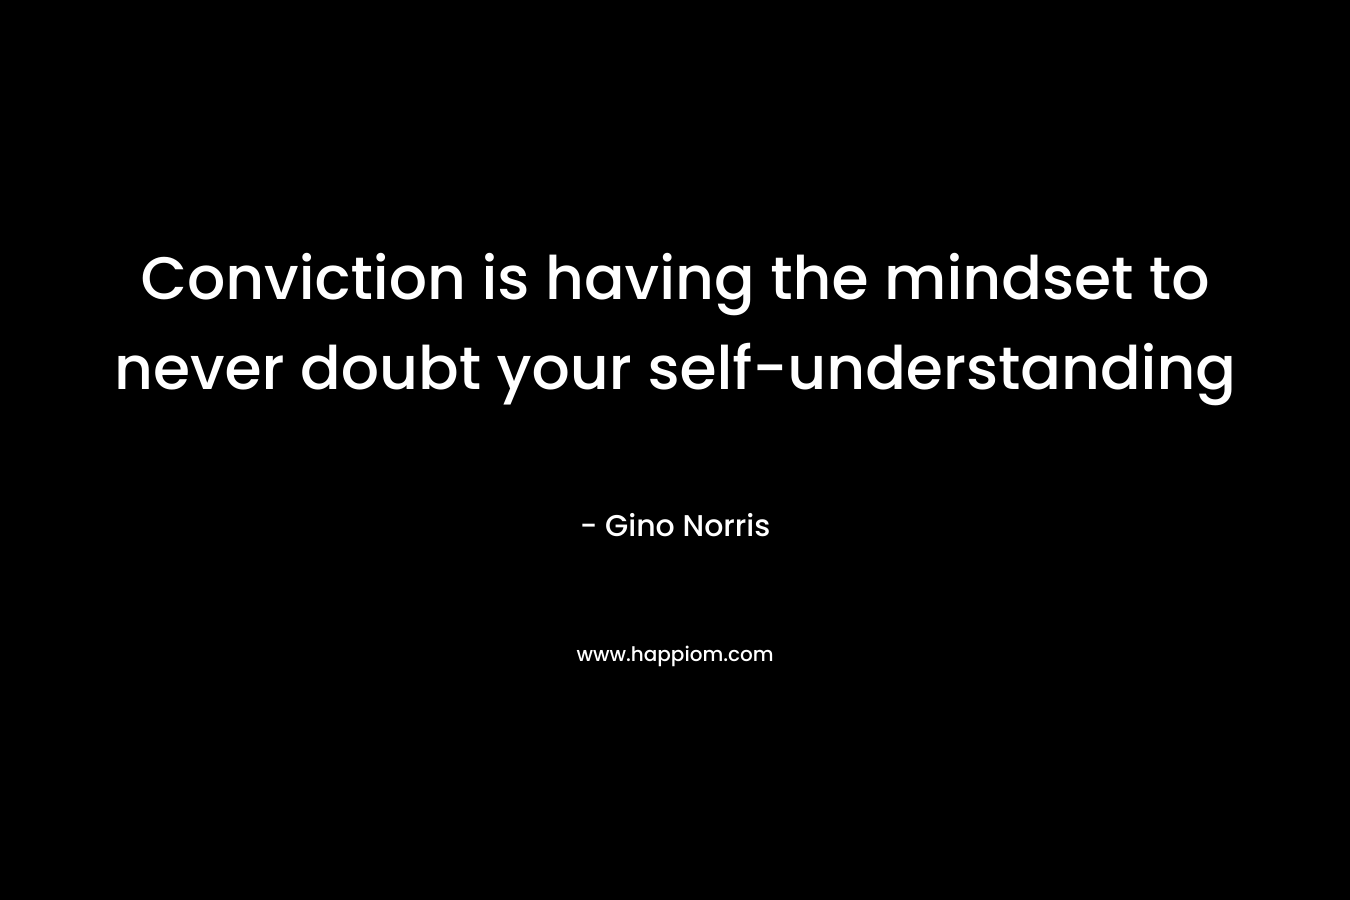 Conviction is having the mindset to never doubt your self-understanding – Gino Norris